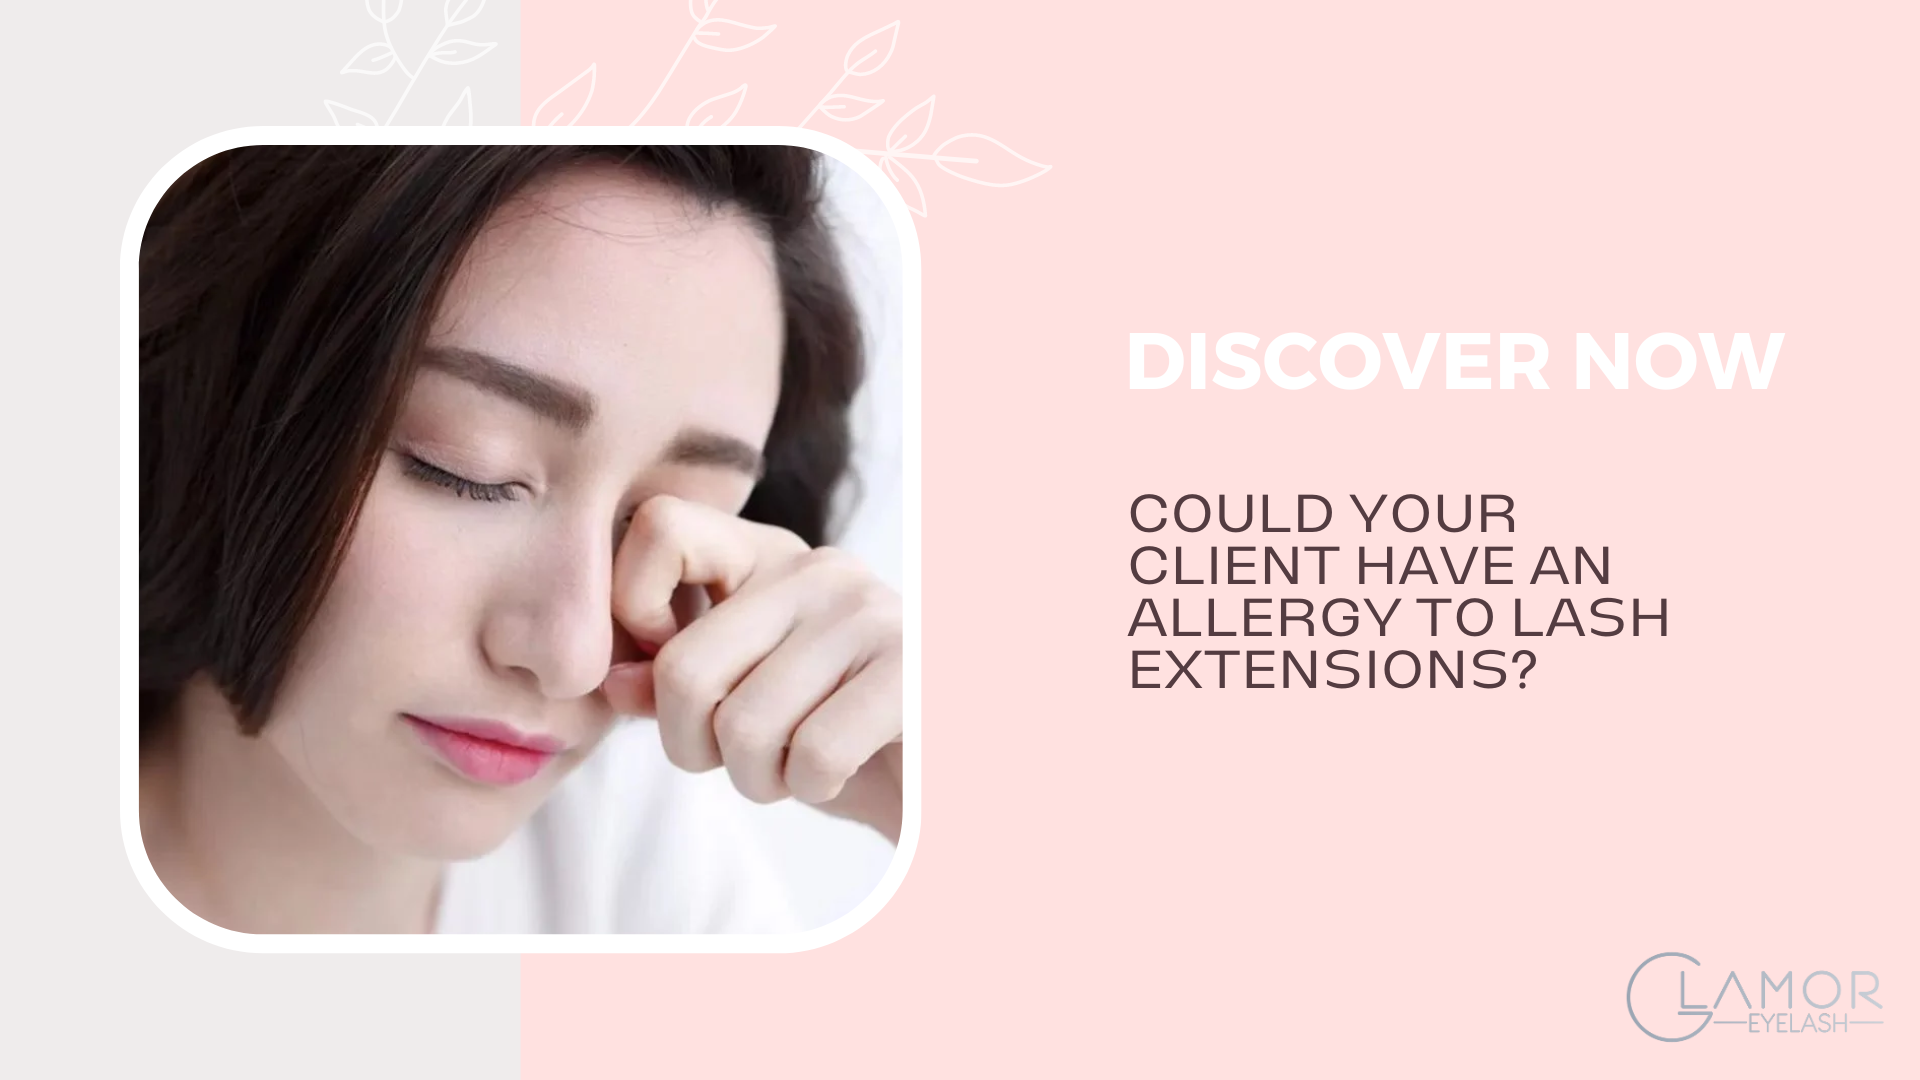 Could Your Client Have an Allergy to Lash Extensions? Discover Now!